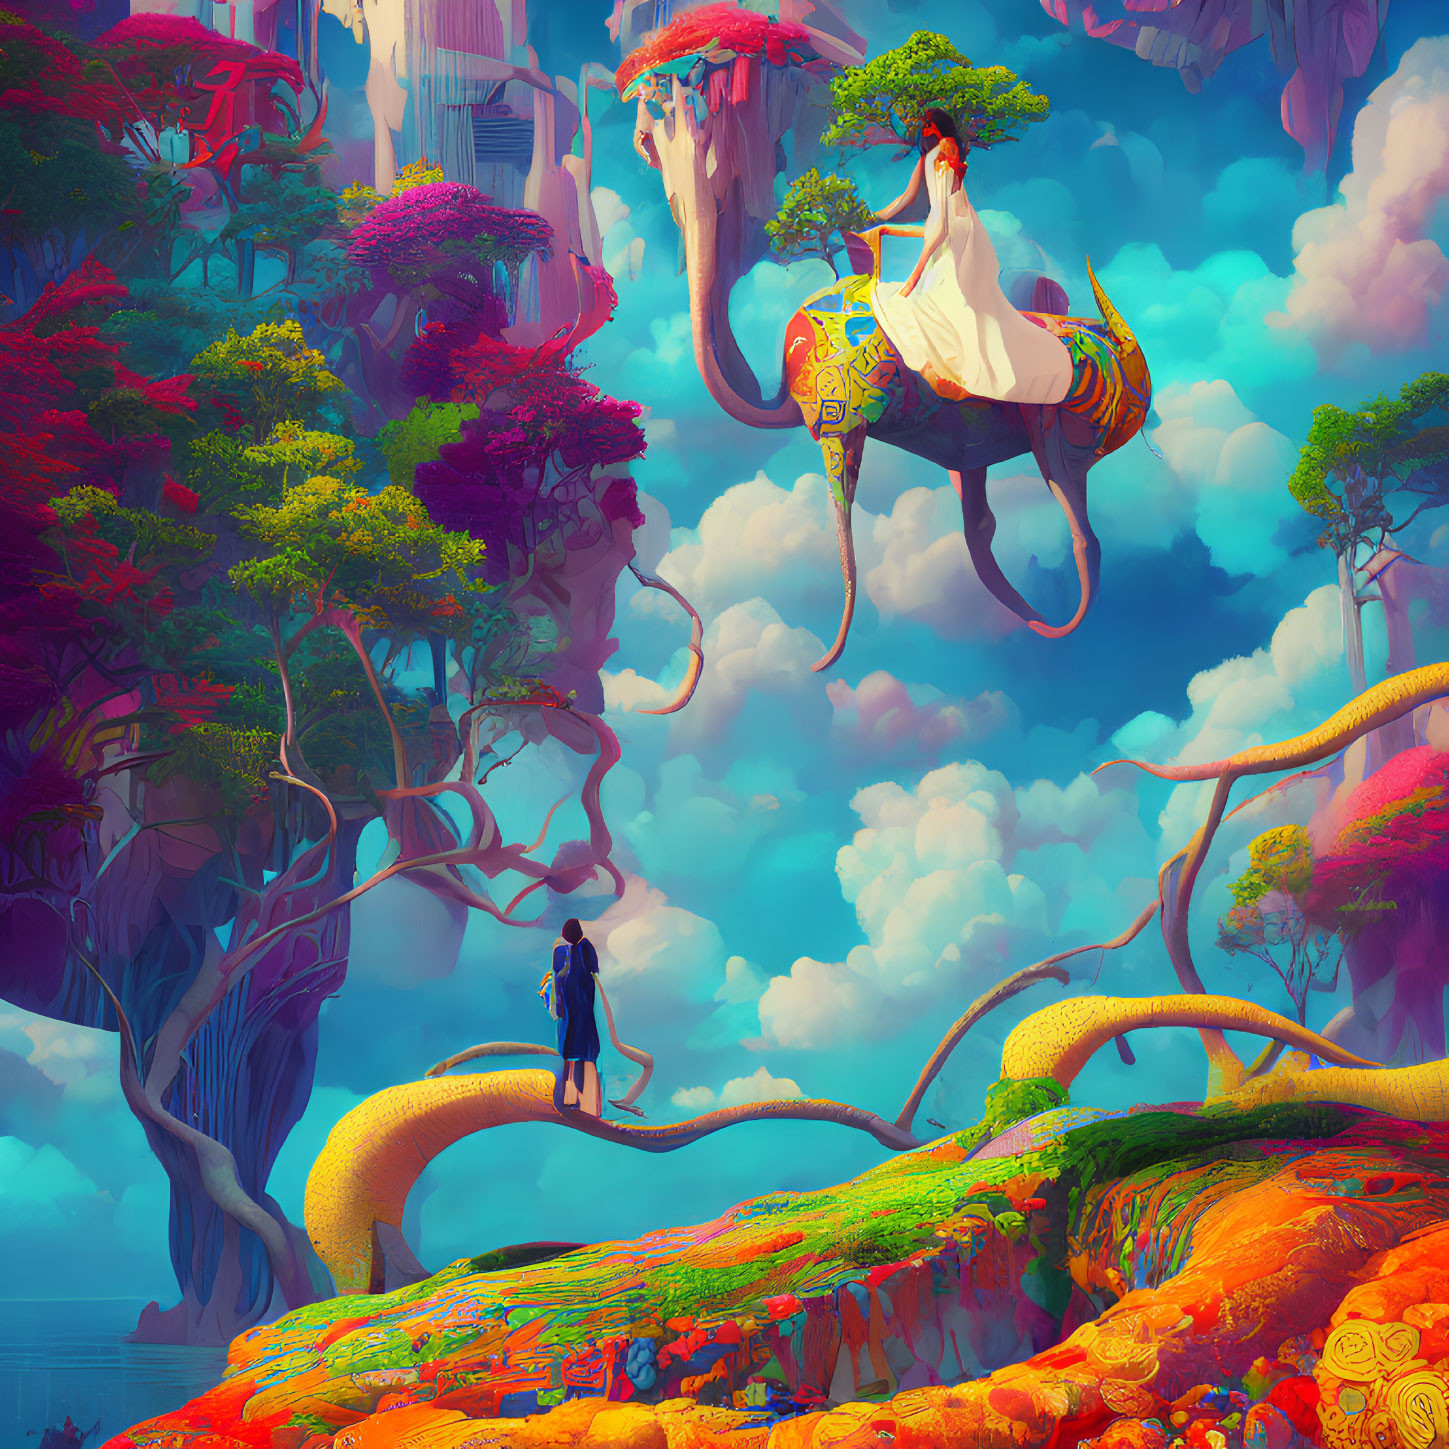 Fantastical landscape with giant elephant and colorful flora